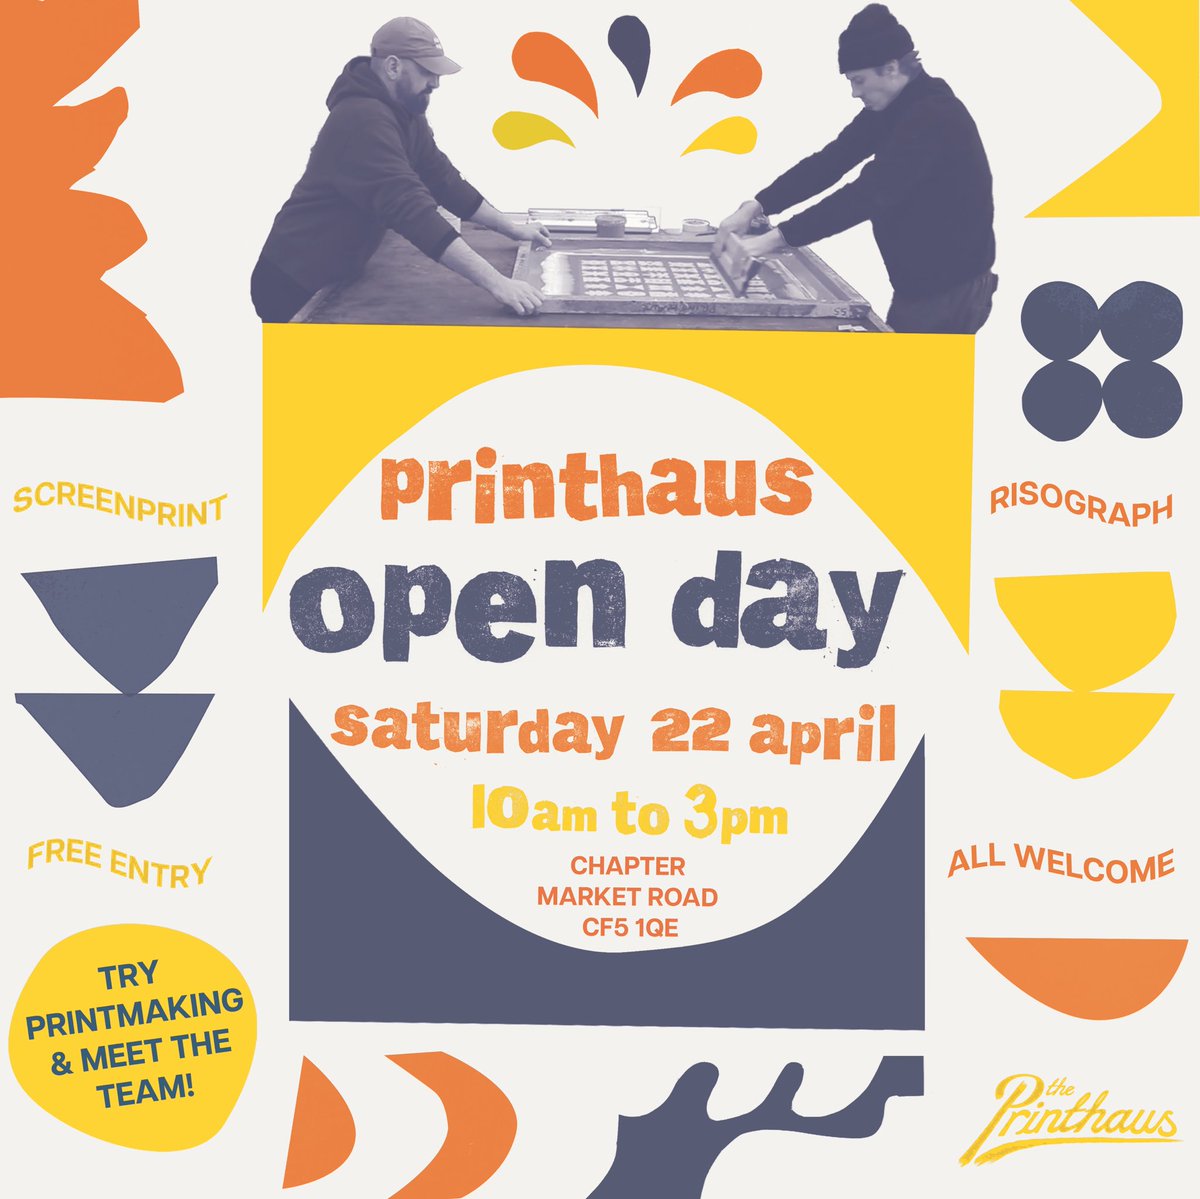 Our Open Day is FREE & suitable for all the family, no print experience required. A chance to meet The Printhaus team & our studio members, see what we’re all about & also get hands-on with lots of print activities. For more info, hit the link 👇 theprinthaus.org/open-da